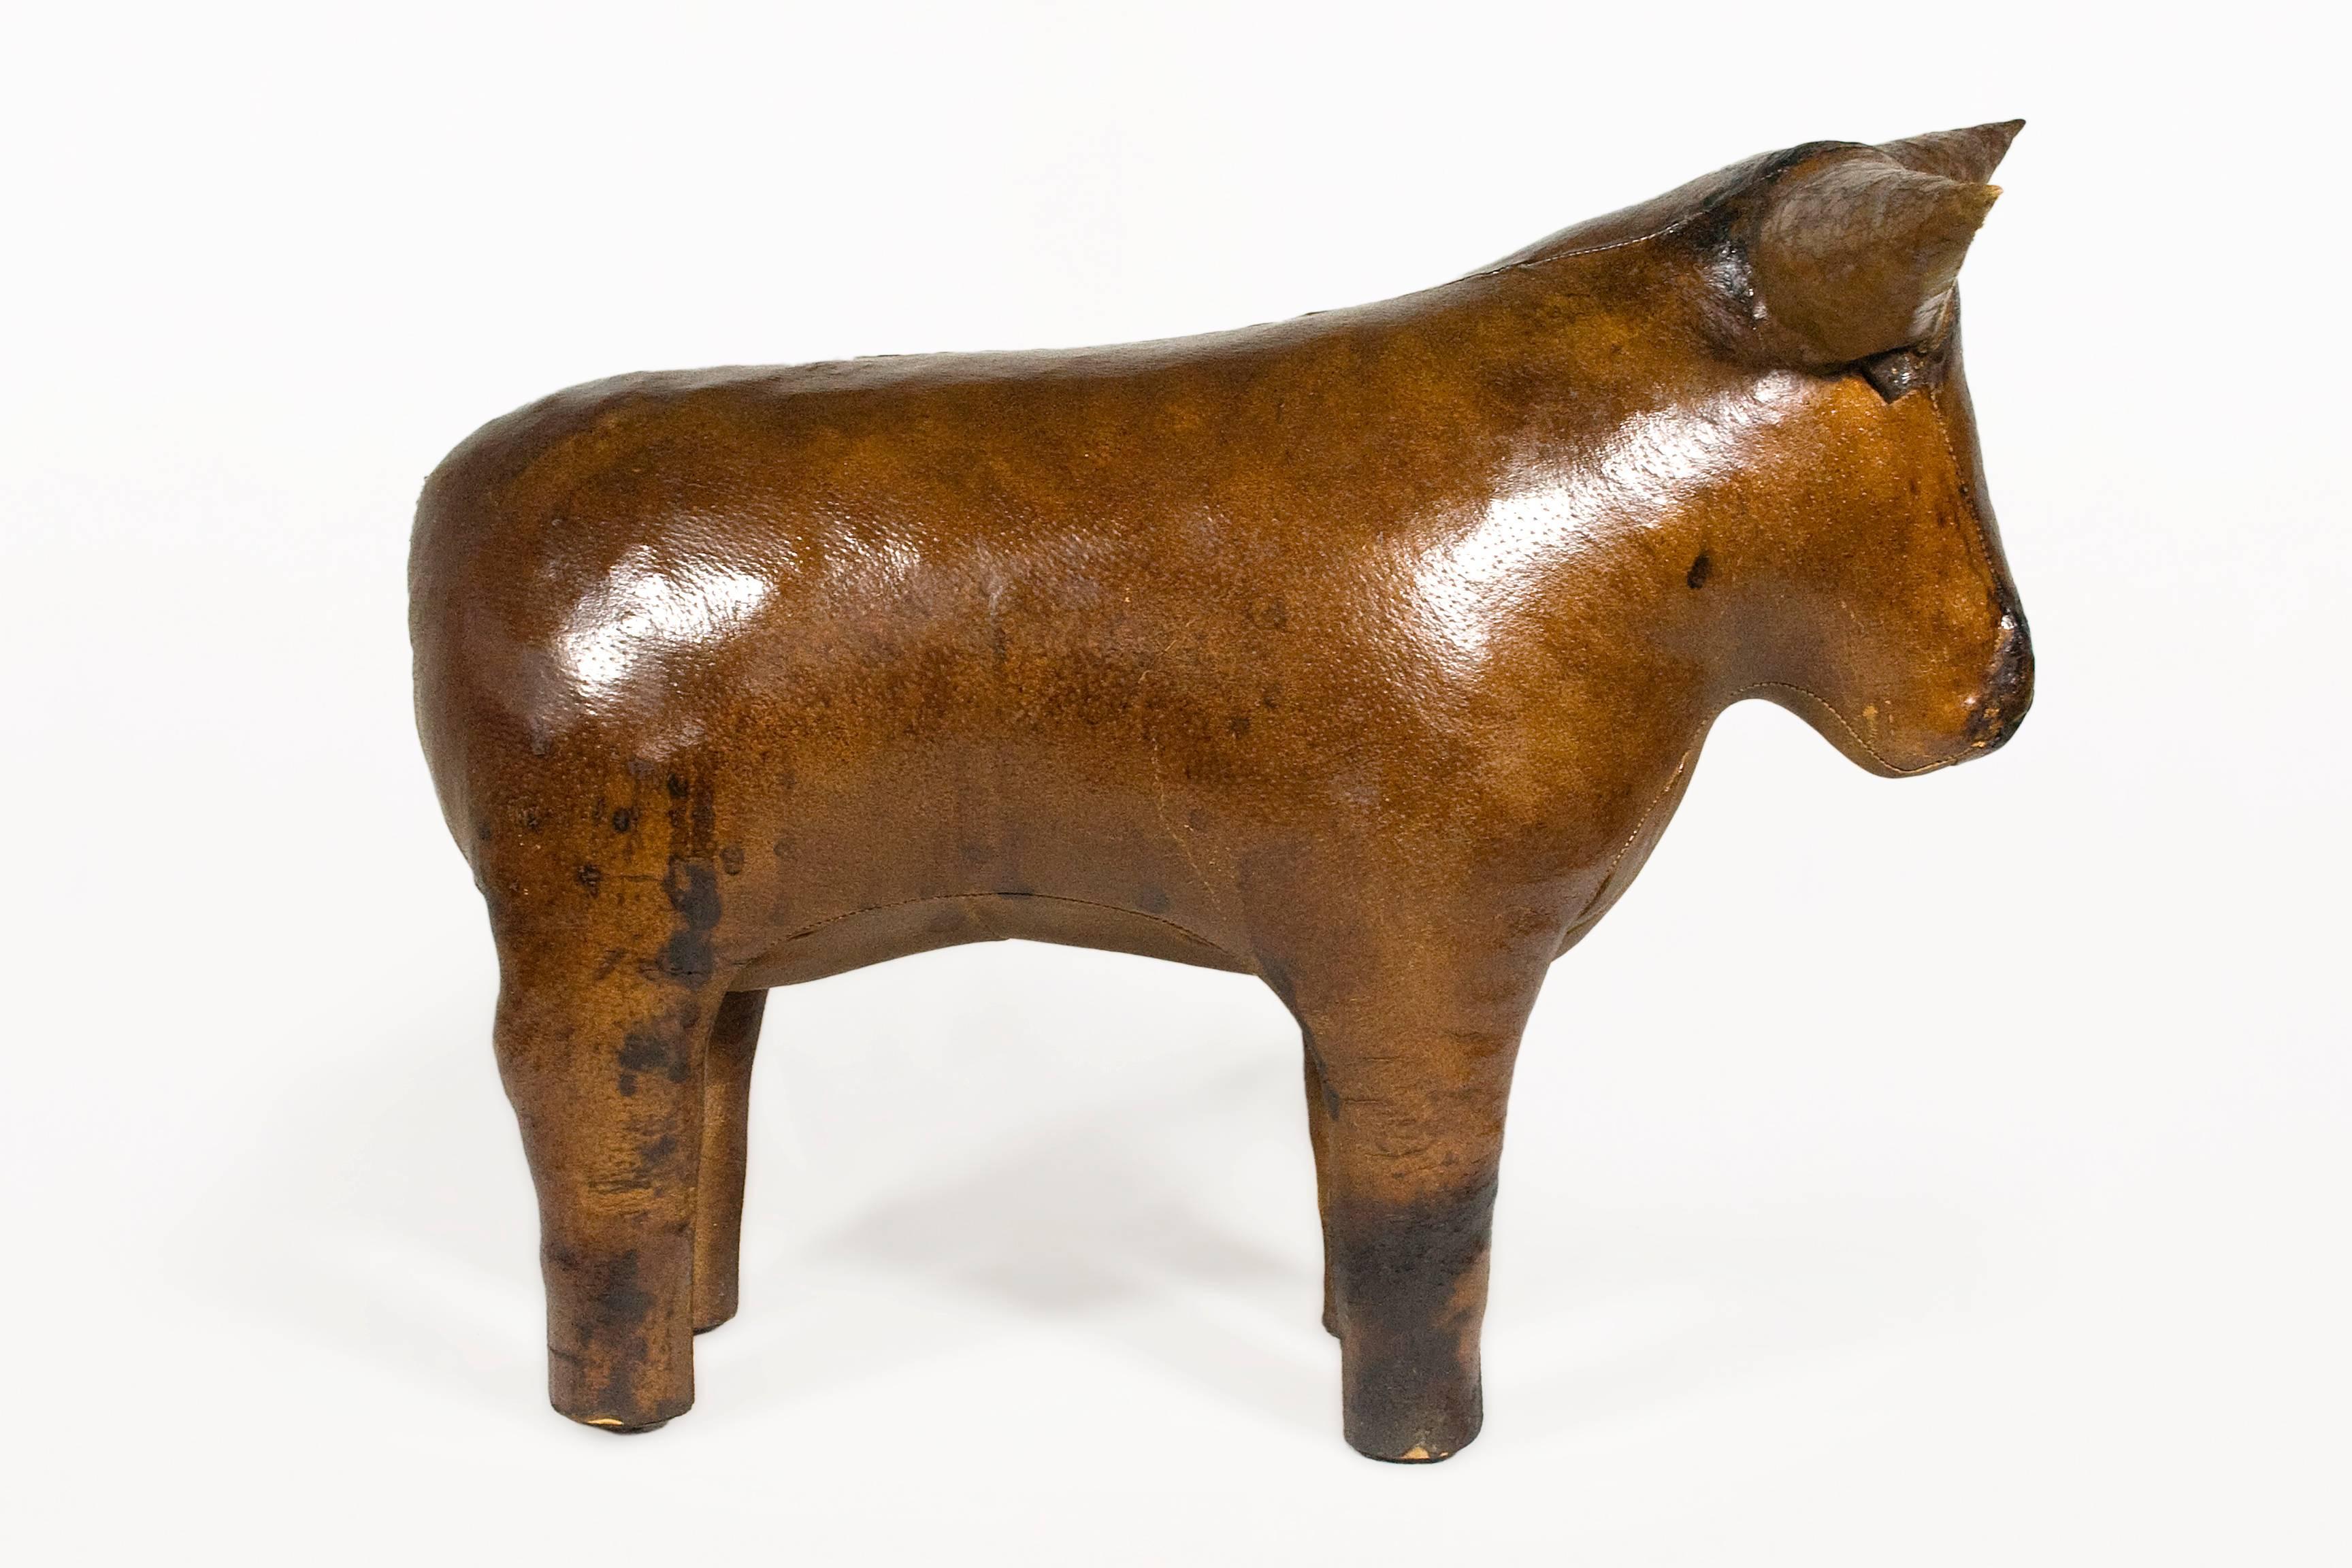 Magnificent and rare vintage Abercrombie and Fitch leather bull footstool.
Patined leather.
circa 1970, England.
Solid.
Good vintage condition.